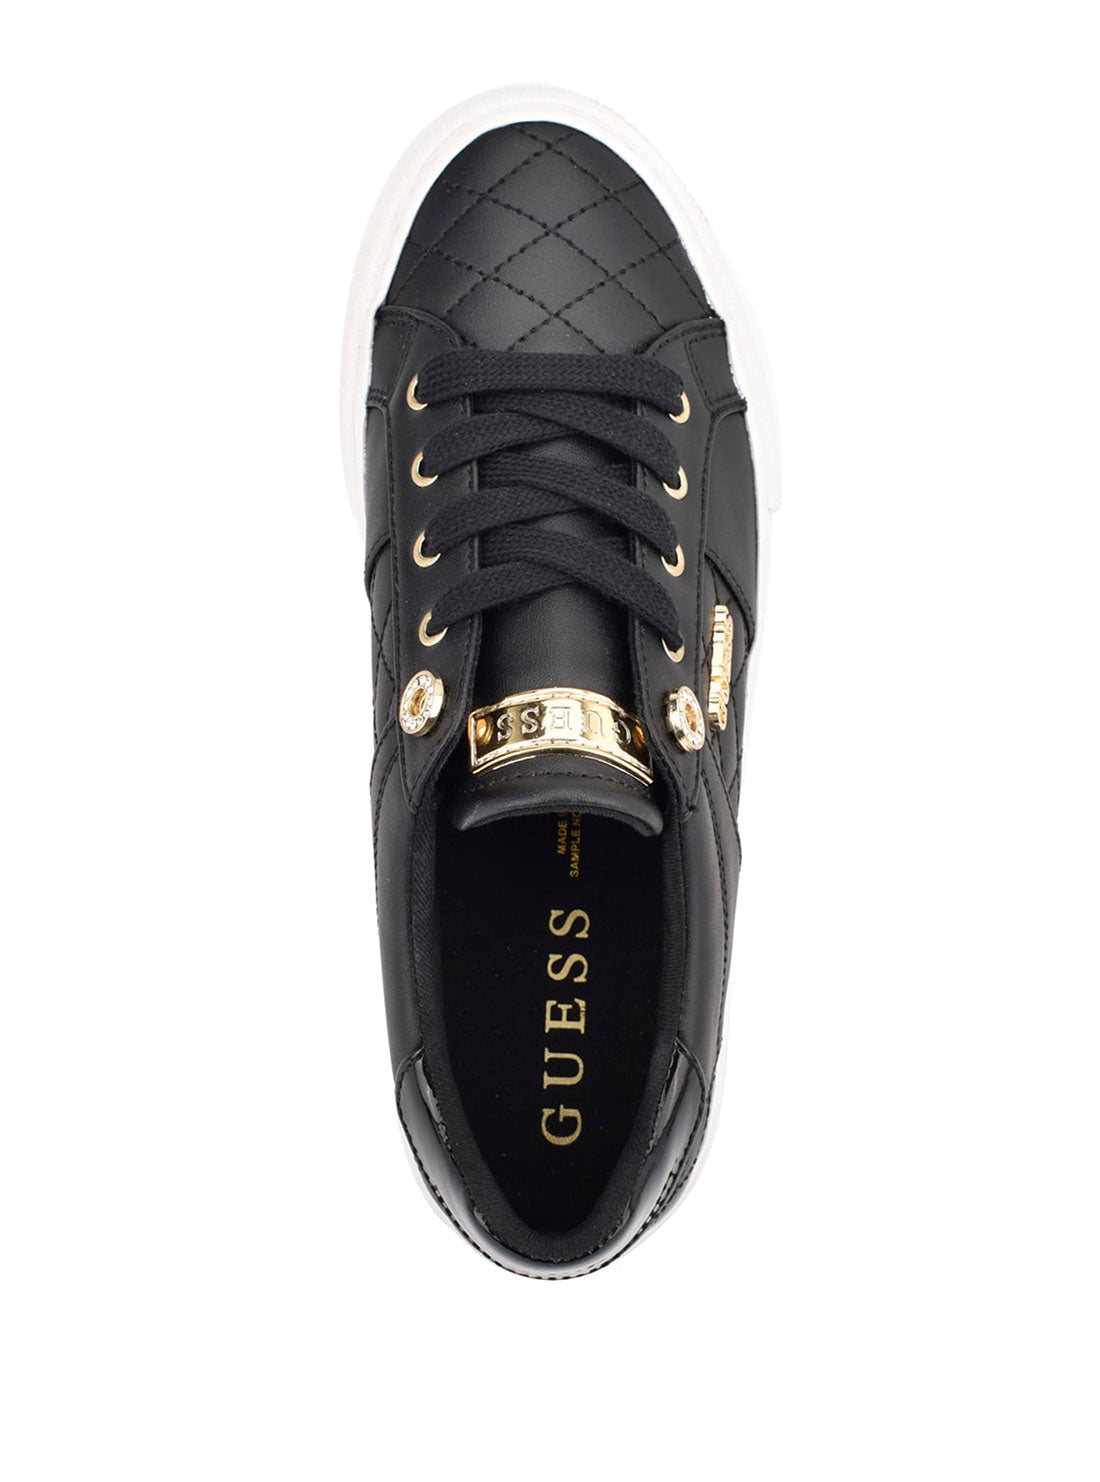 GUESS Black Gold Loven Low-Top Sneakers top view